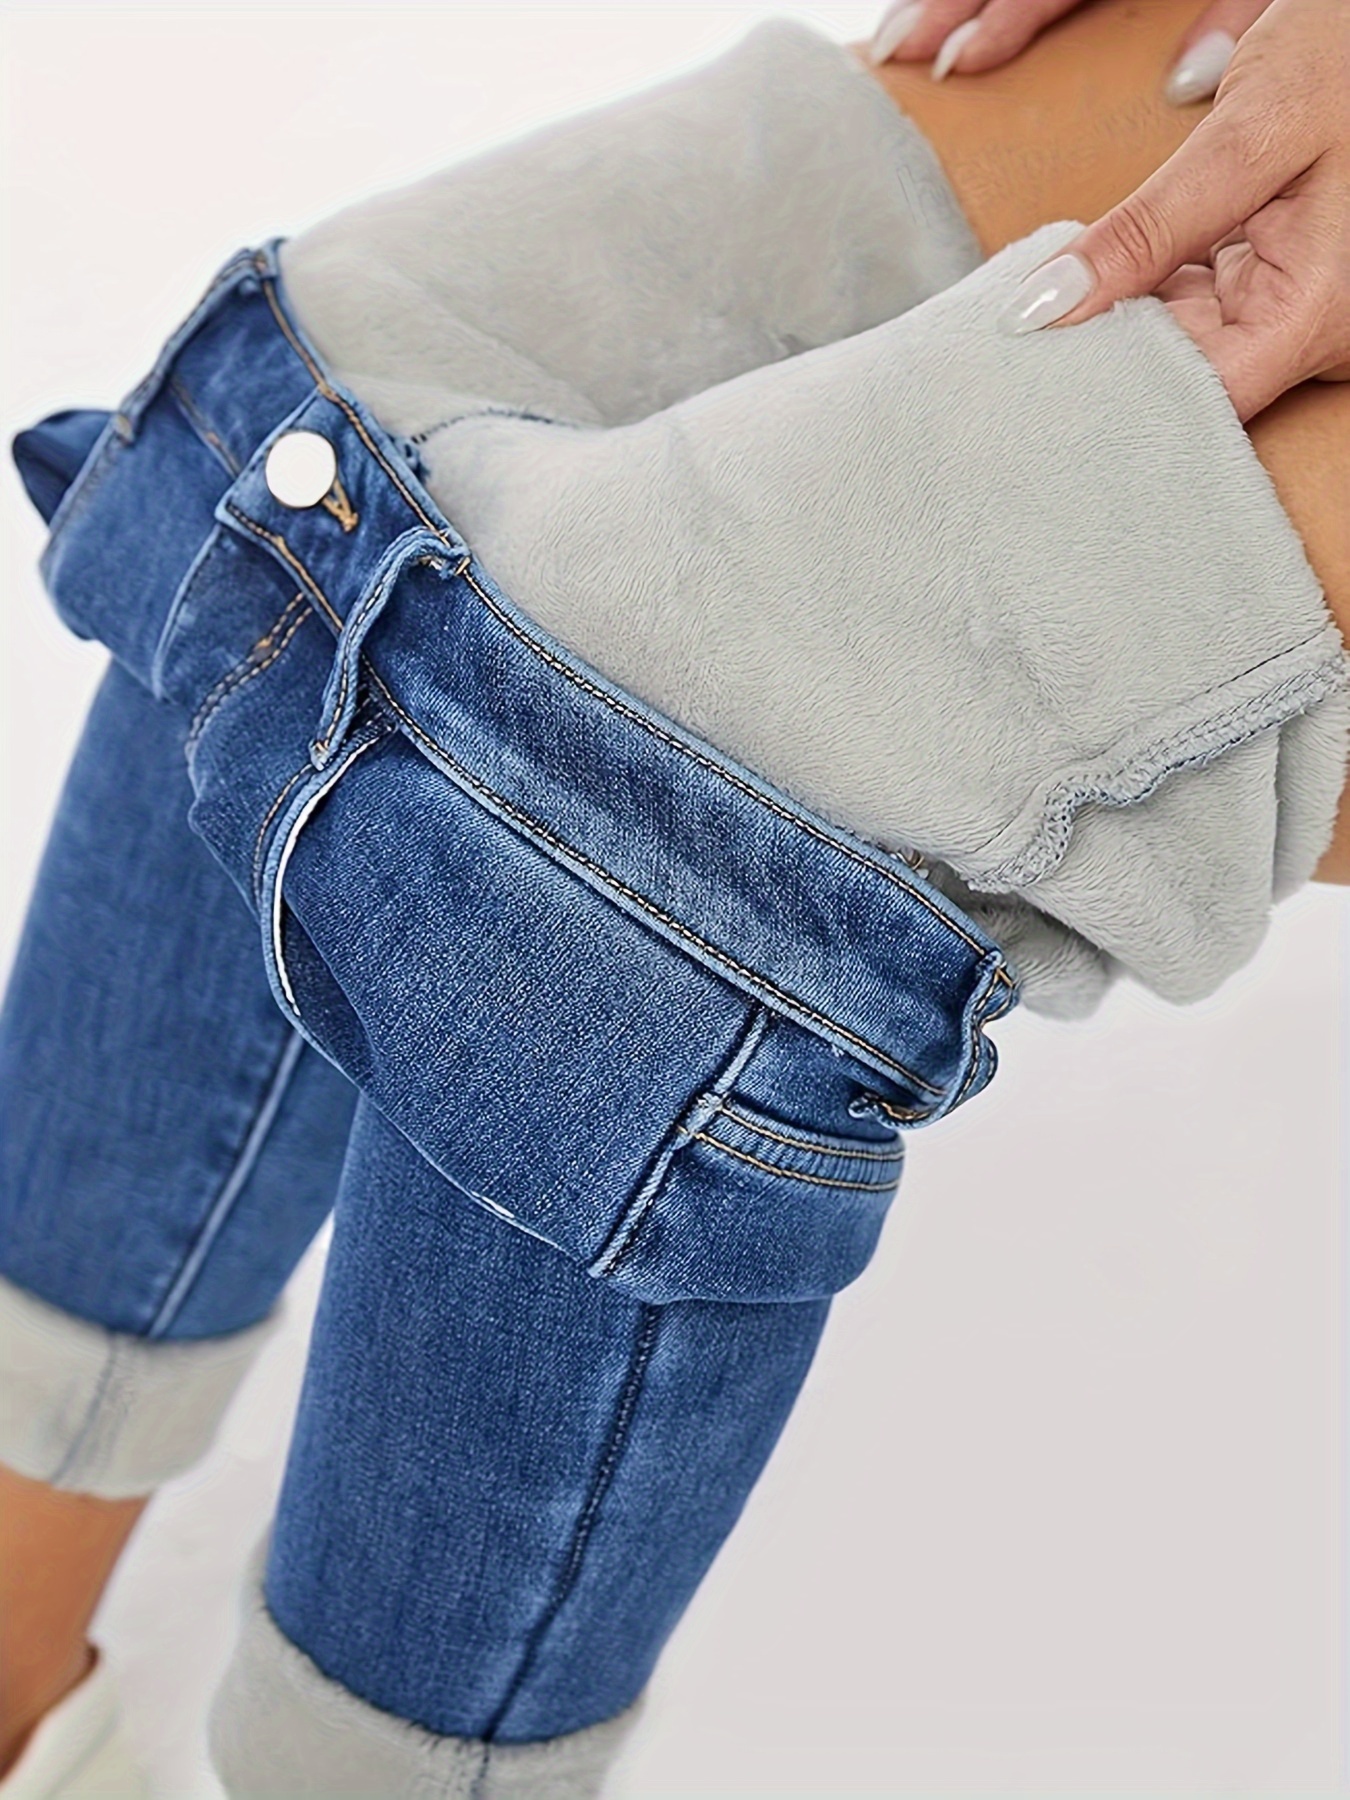 Fleece Lined Women Jeans Skinny High Waisted Thick Fleece Warm Stretch  Fleece Lining Women Jeans Pants Thick Tights